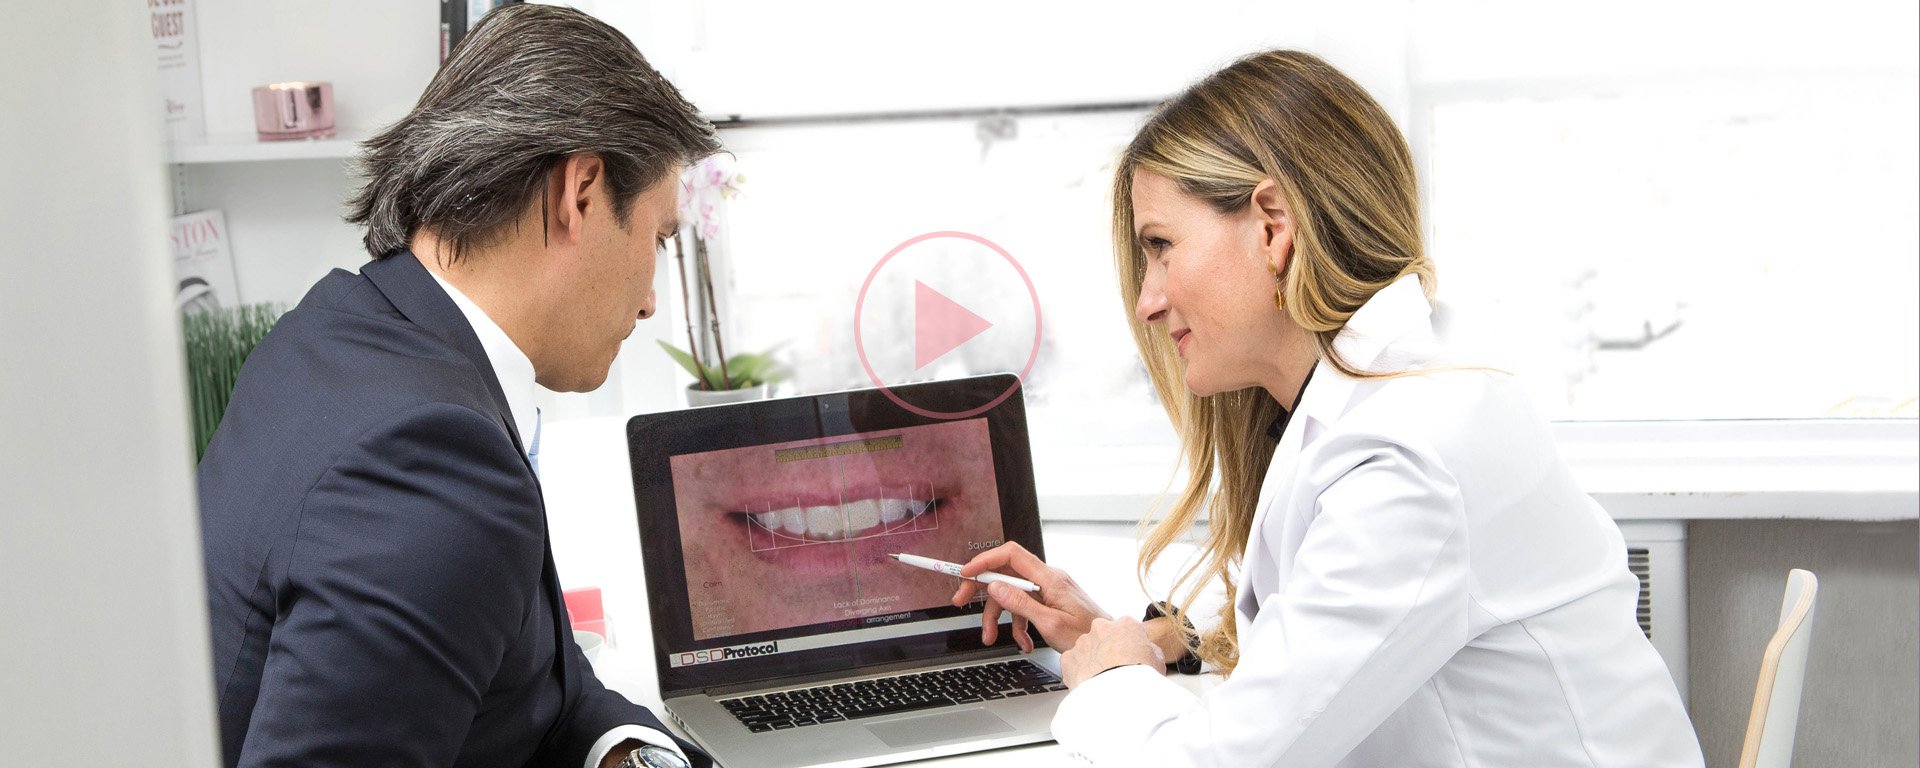 Dr Maria Cardenas with her patient at a laptop talking to him about his smile design with DSD dental treatment.